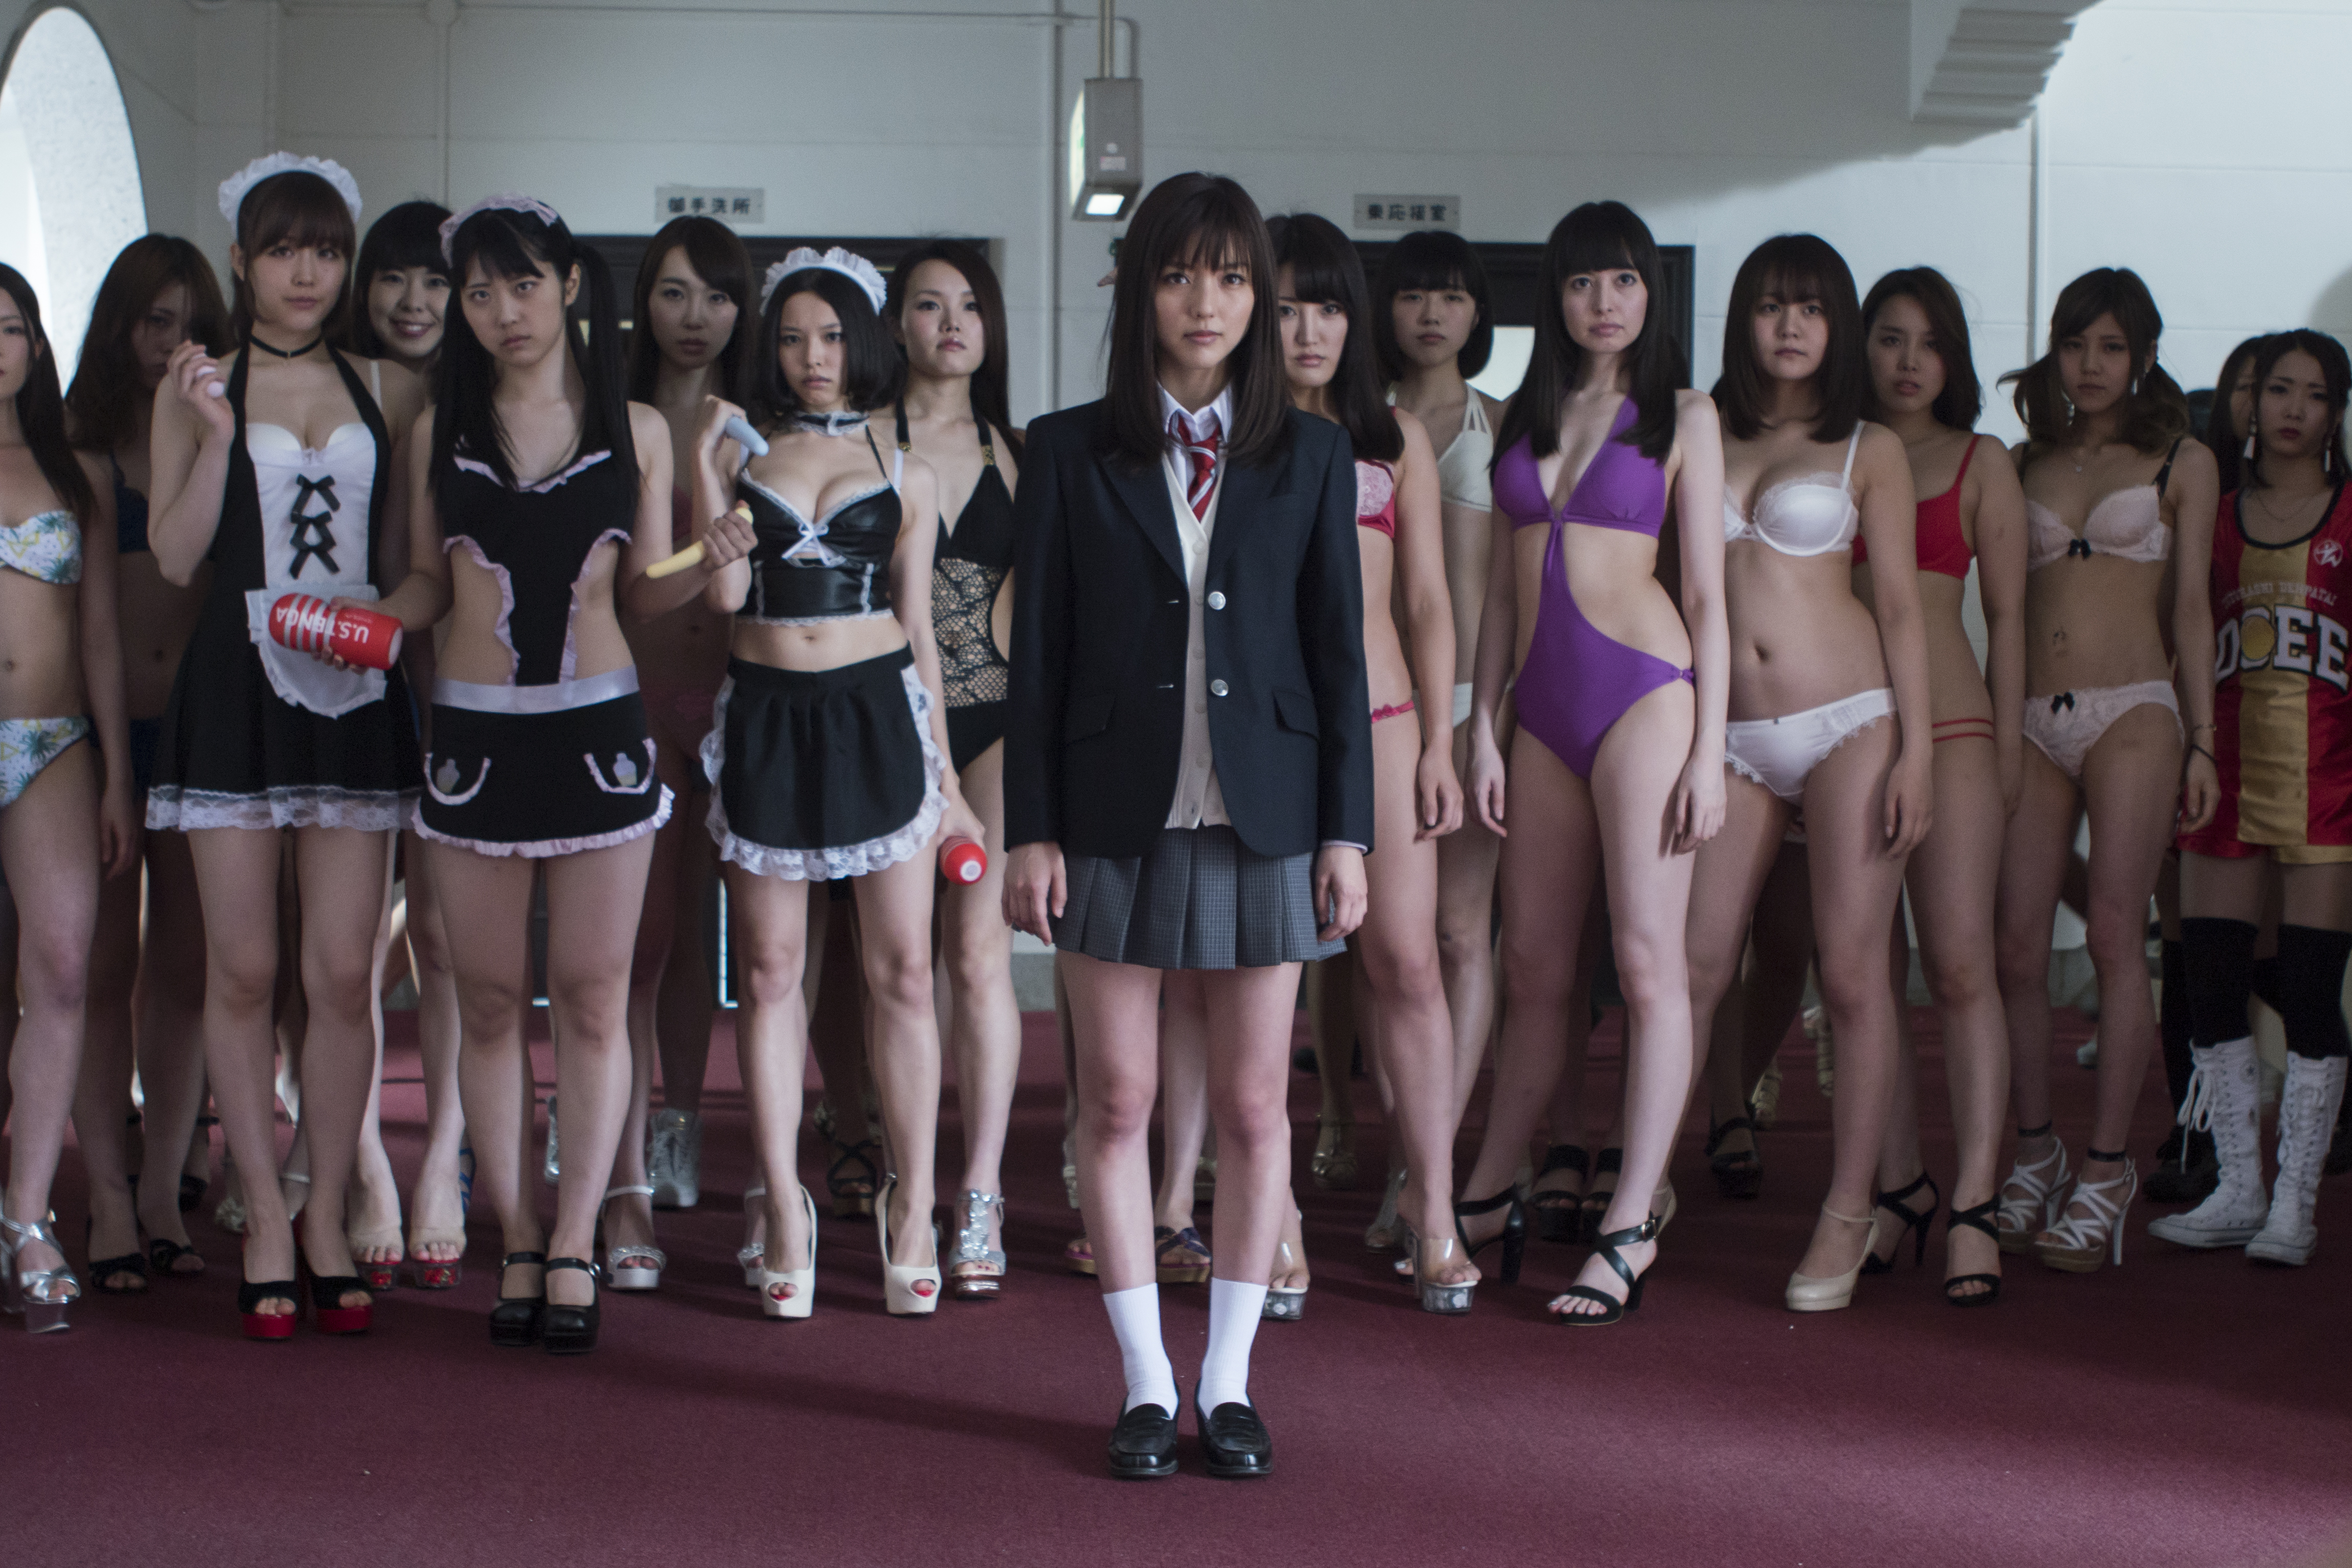 Schoolgirl Upskirt Porn - Film review: Virgin Psychics â€“ Sion Sono's unapologetically bawdy sex  comedy fails to engage | South China Morning Post